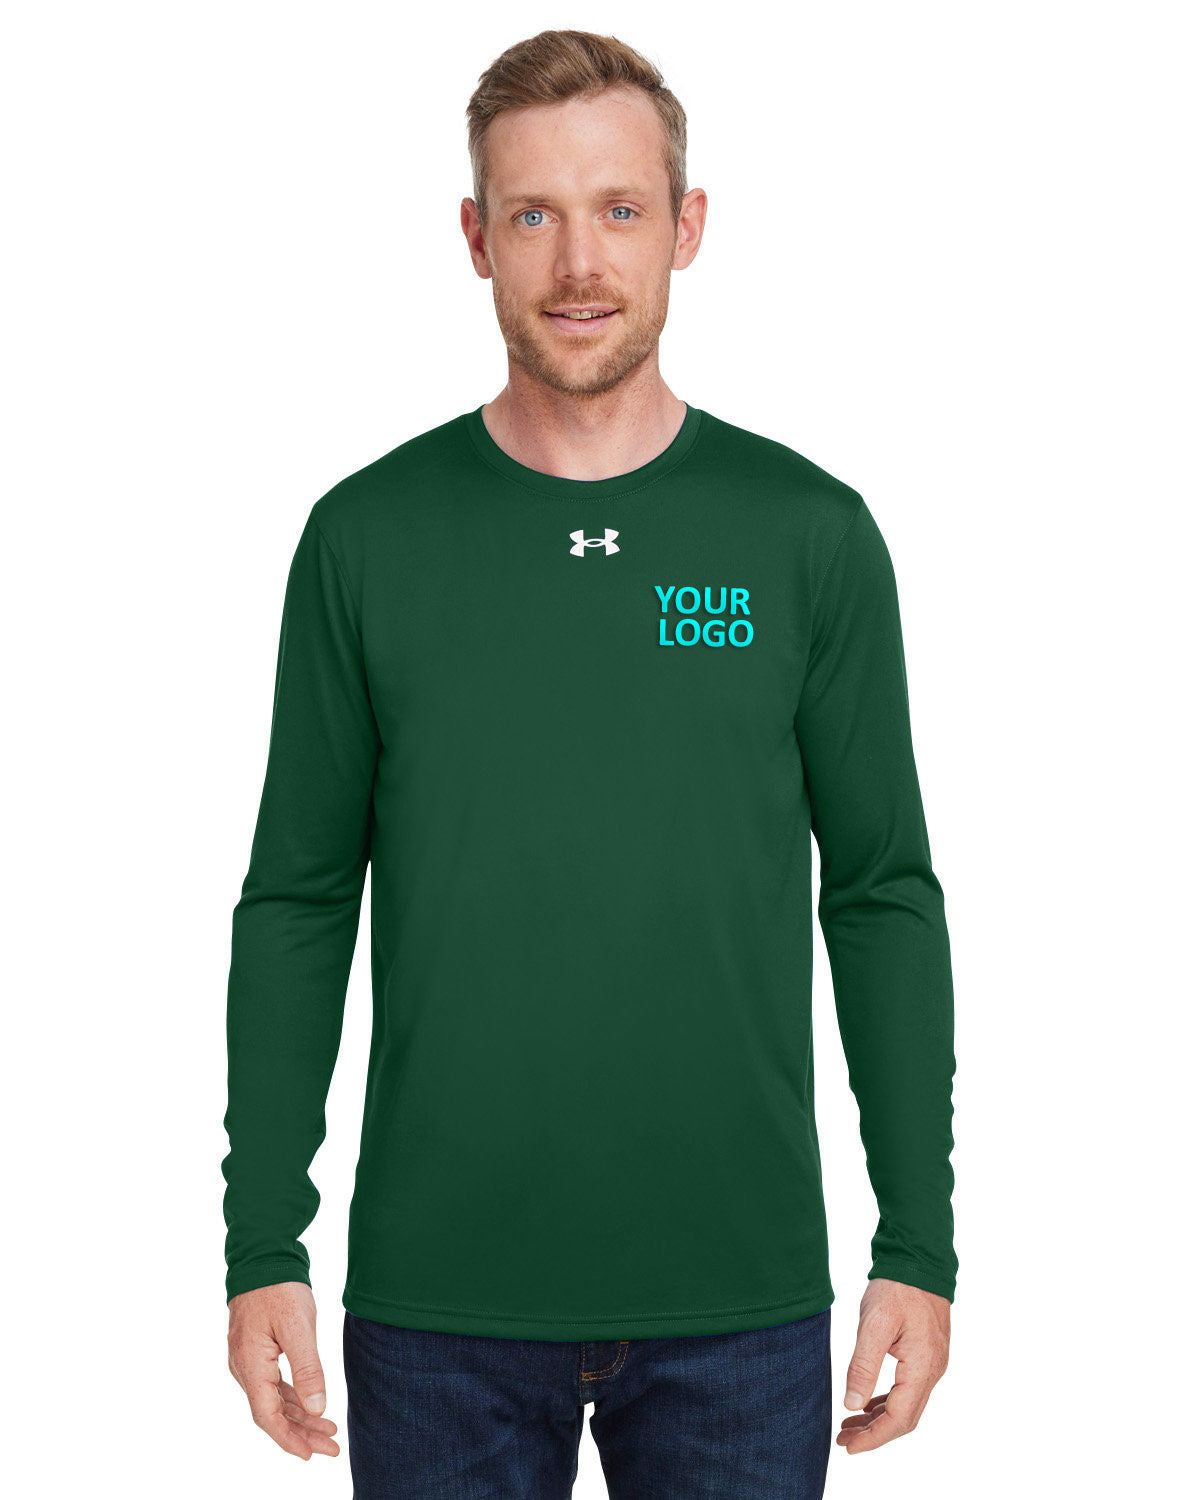 Under Armour Men's Tech Long-Sleeve Customized T-Shirts, Forest Green